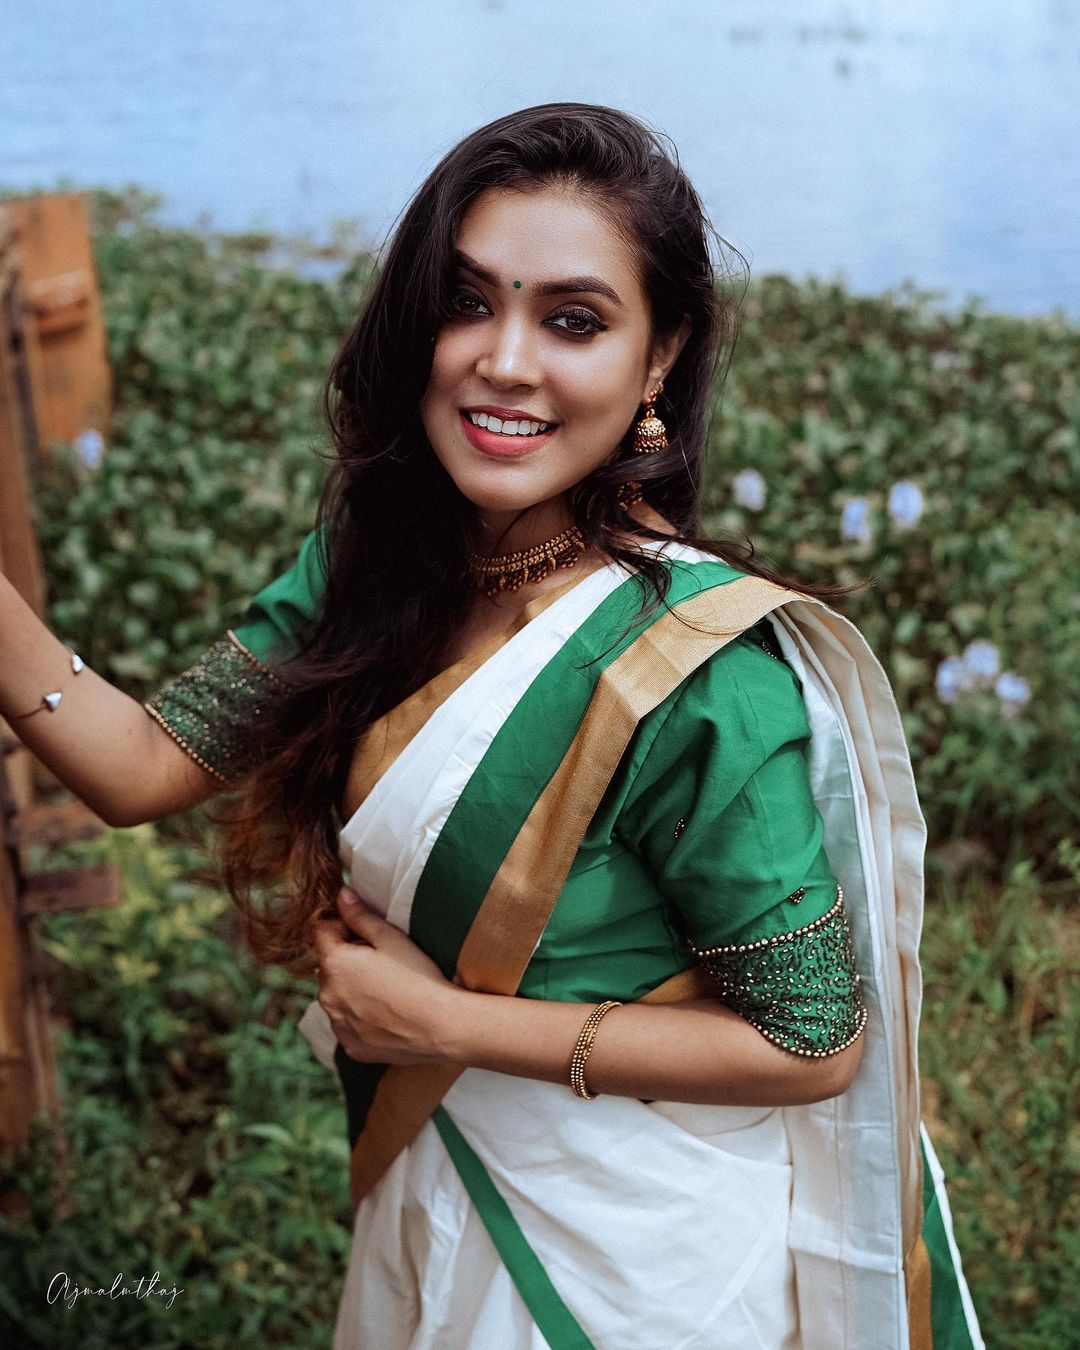 South Indian Instagram model star Mithuvigil hot photos in sexy saree. Mithuvigil Instagram photos and video download. Desi South Indian women videos.